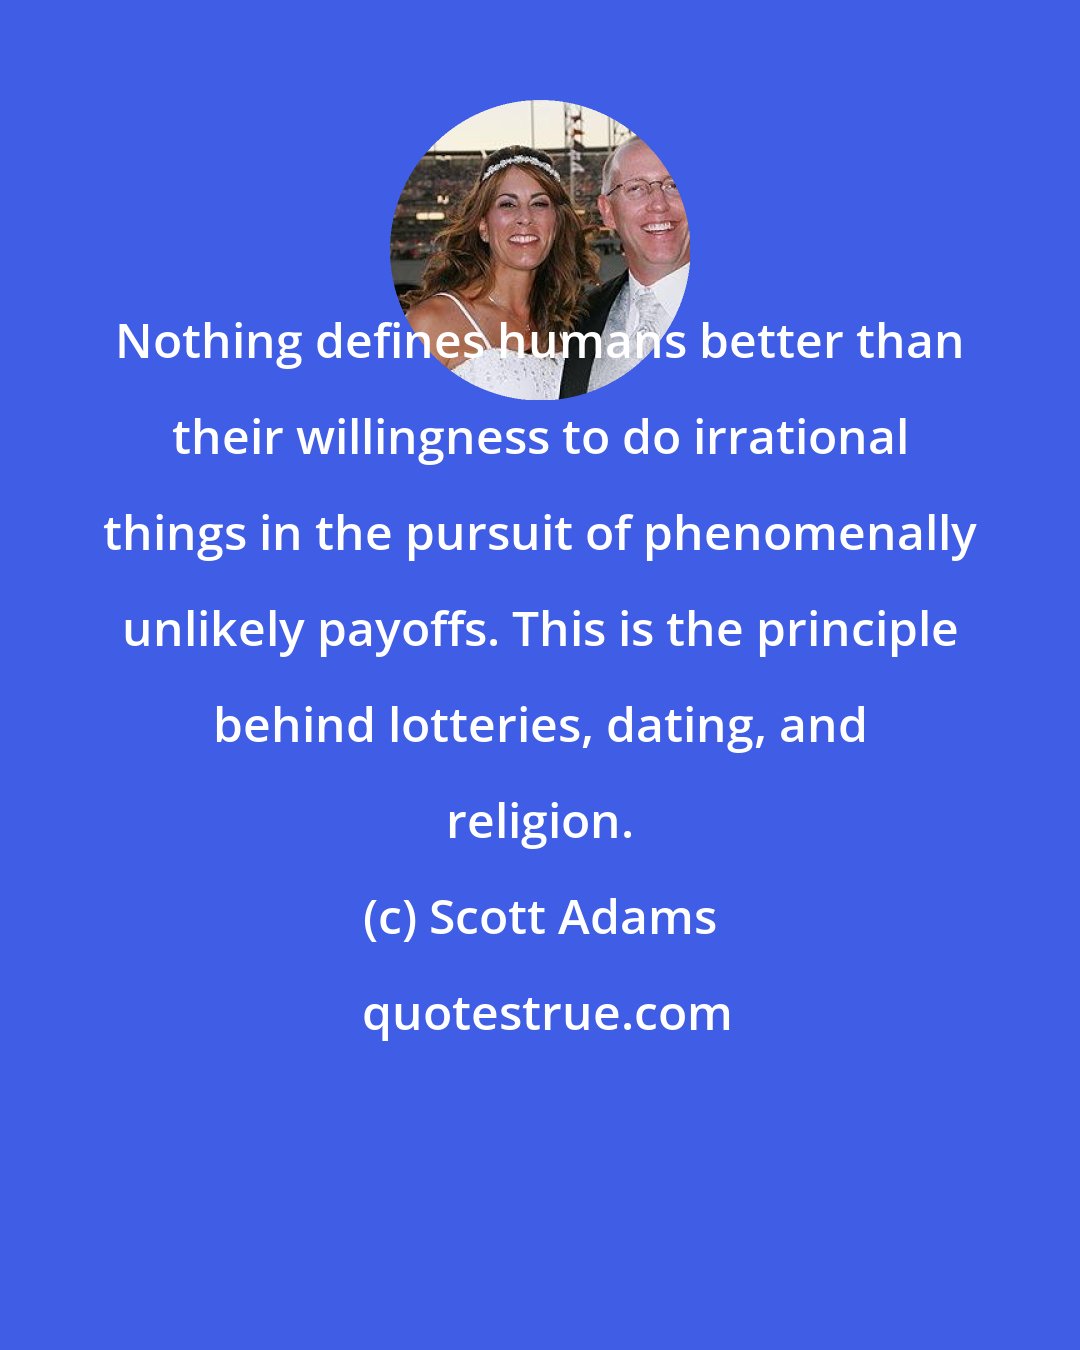 Scott Adams: Nothing defines humans better than their willingness to do irrational things in the pursuit of phenomenally unlikely payoffs. This is the principle behind lotteries, dating, and religion.